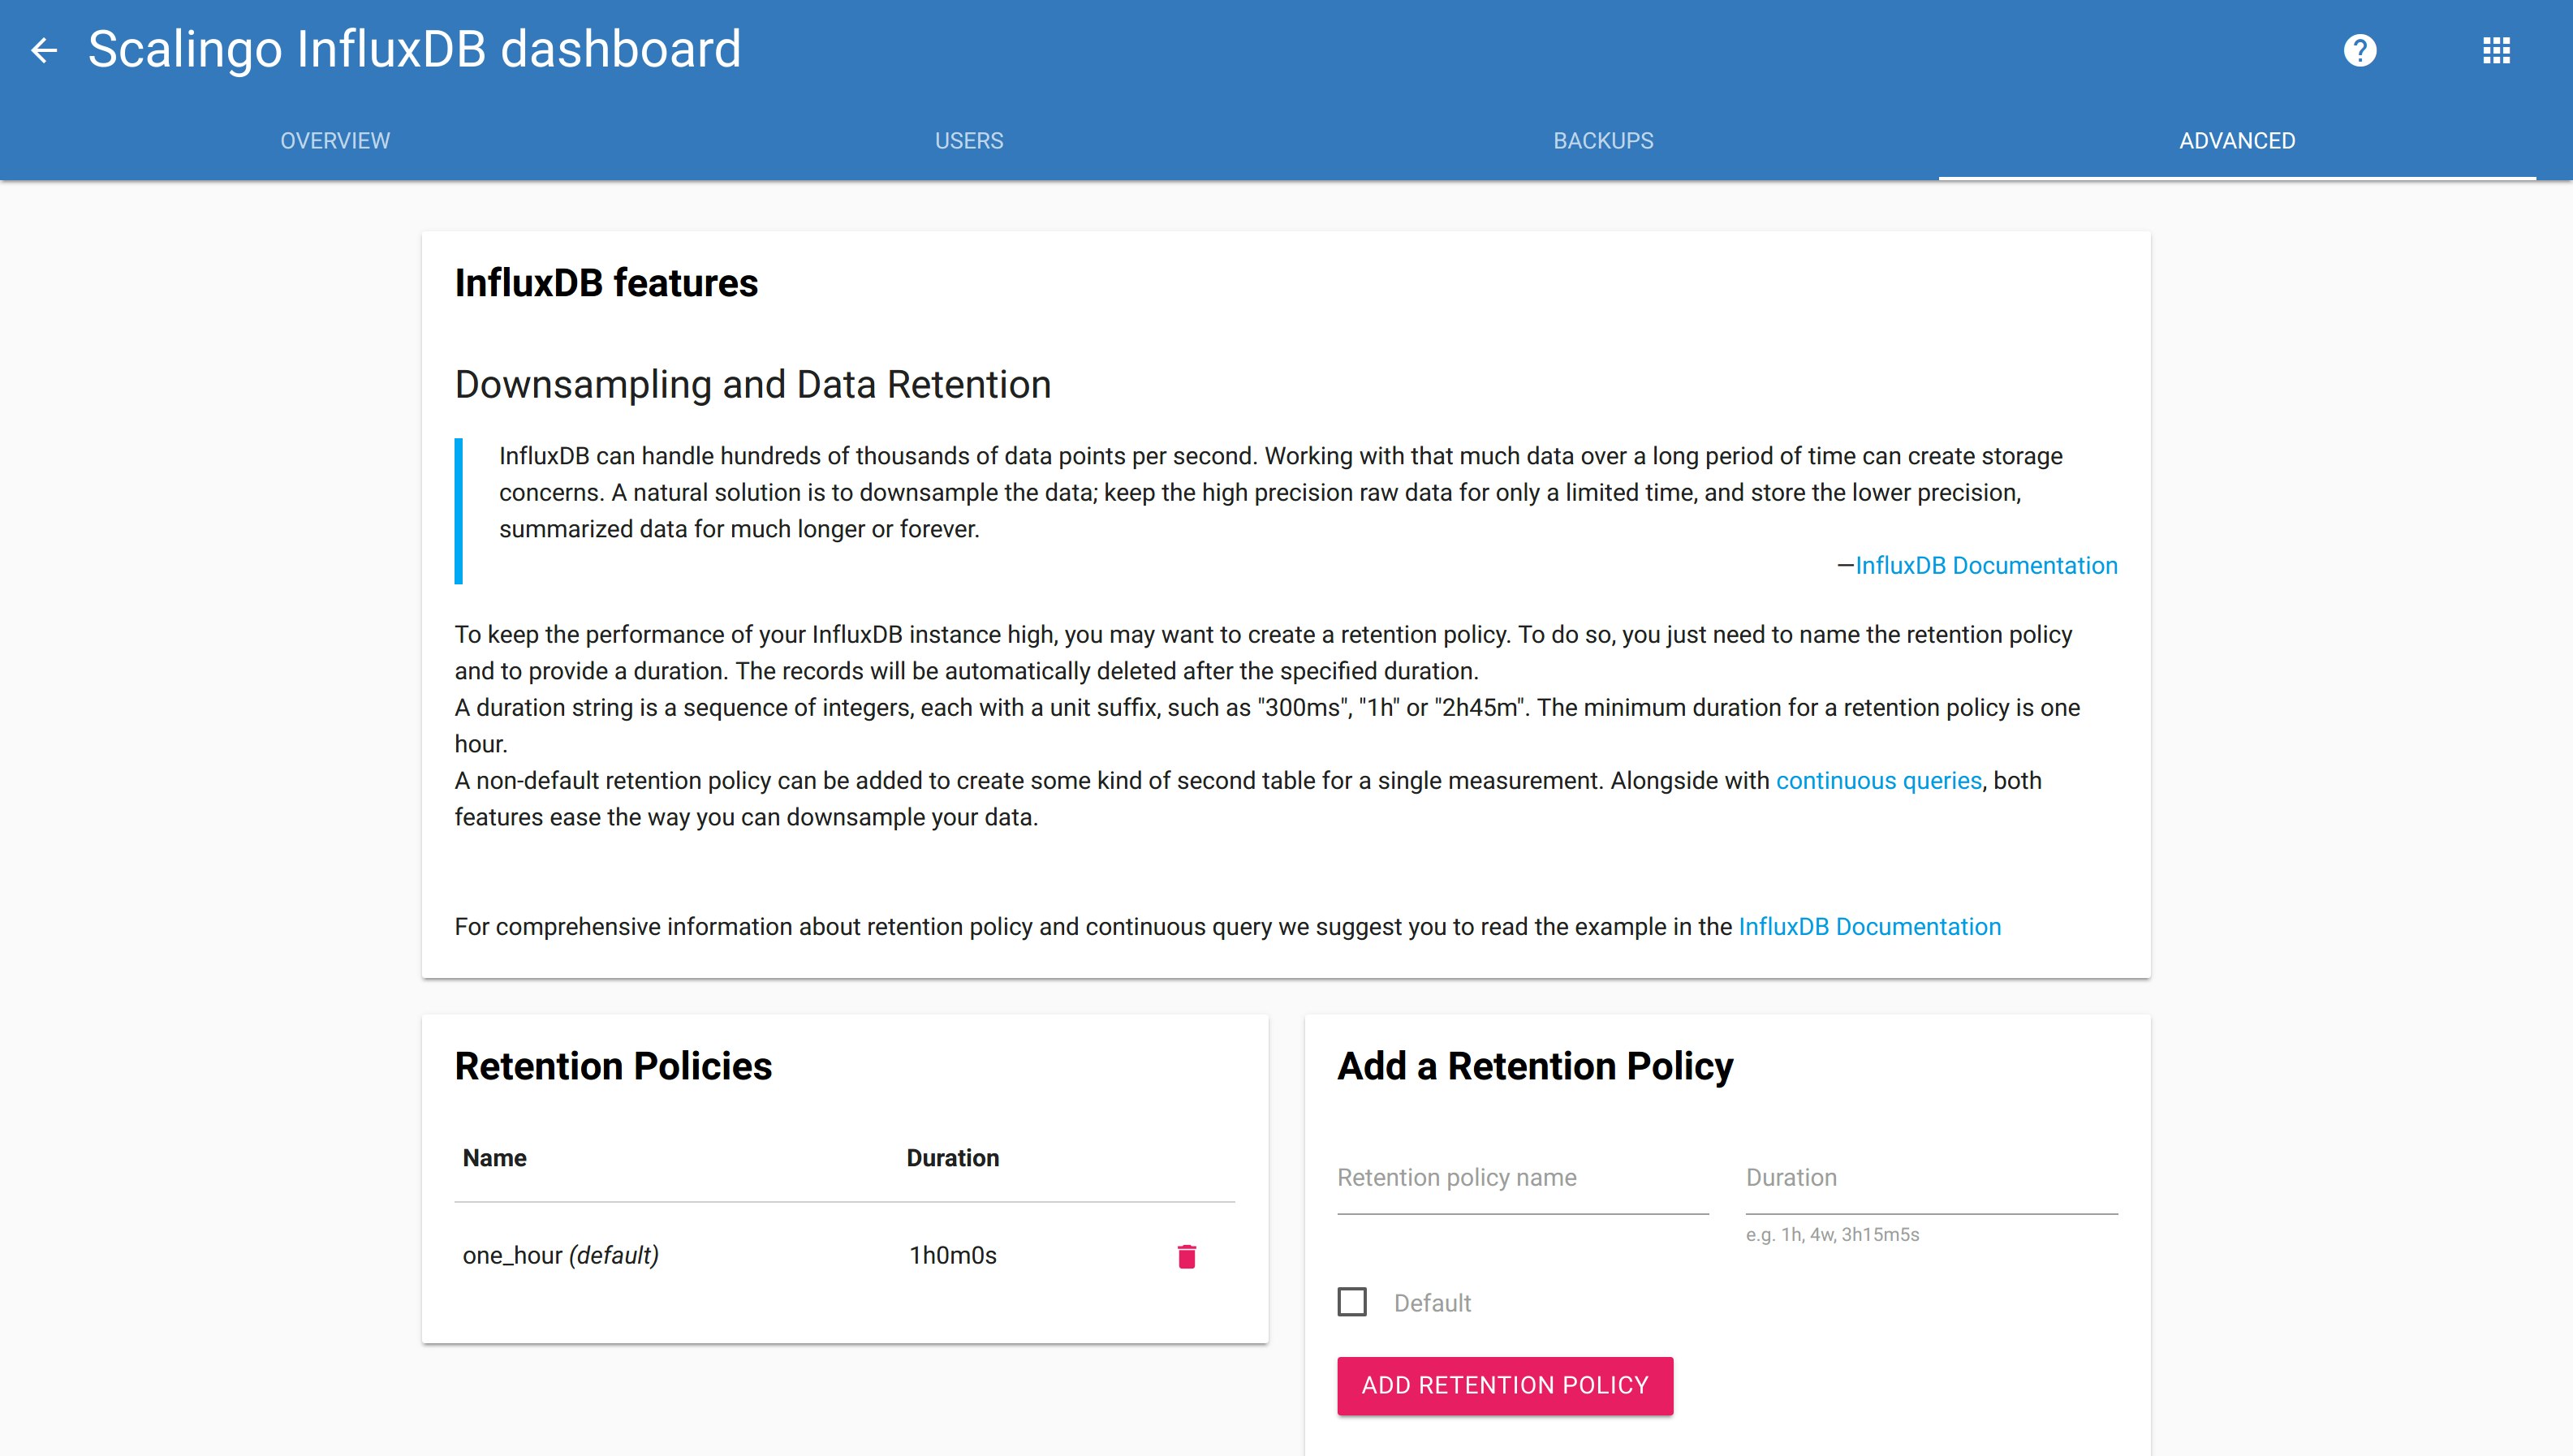 Advanced tab of the database dashboard